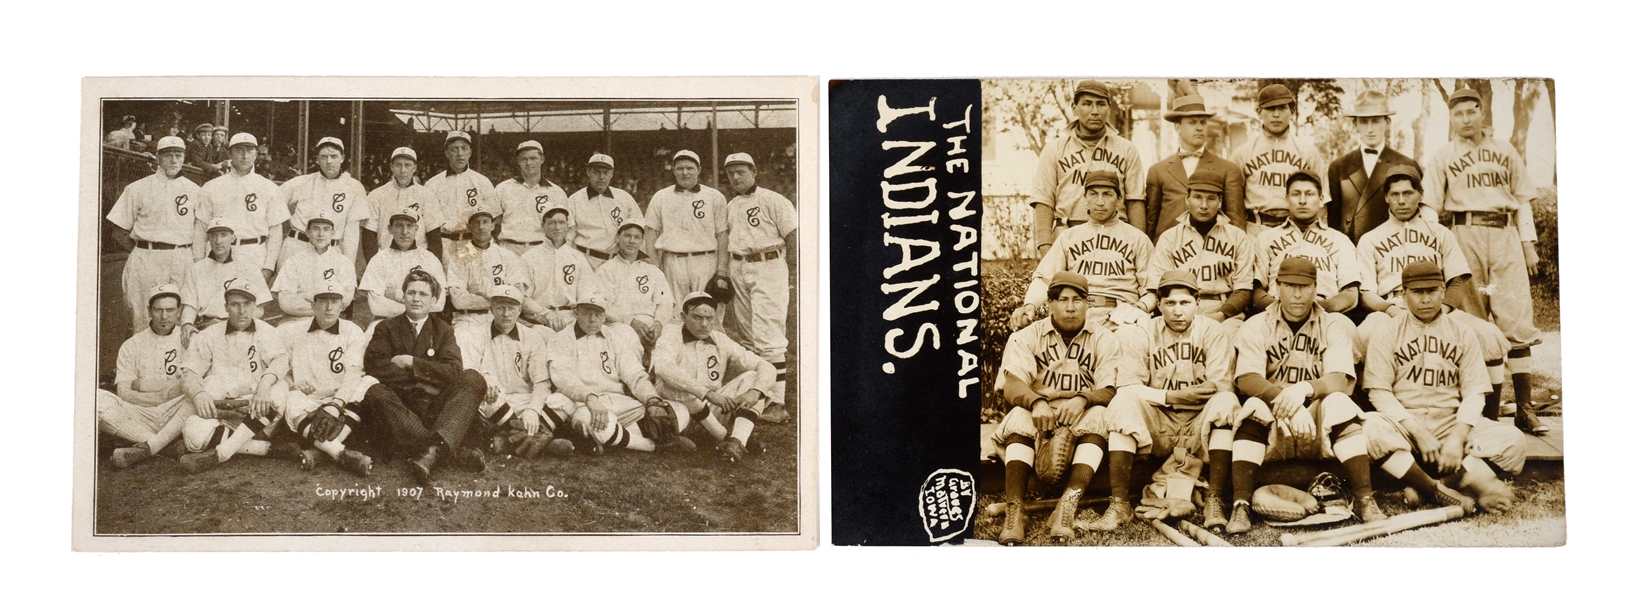 LOT OF 2: CLEVELAND INDIANS & NATIONAL INDIANS POST CARDS.